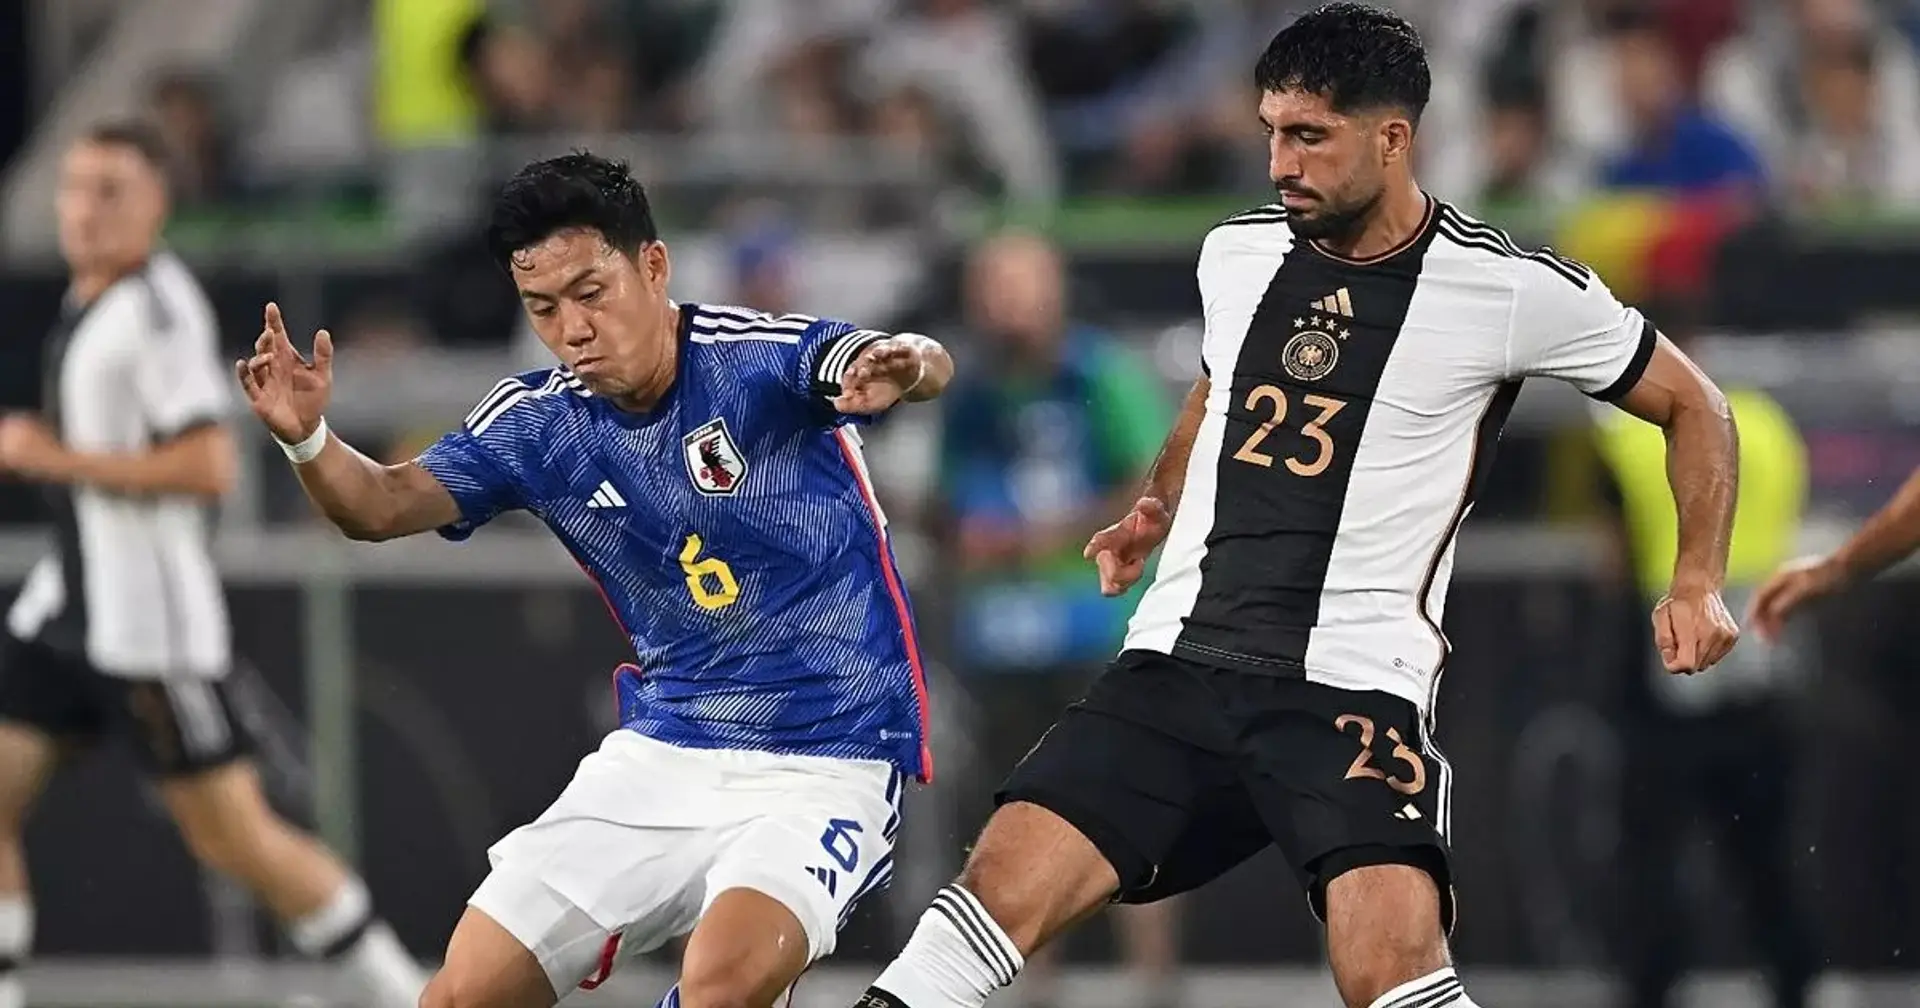 4/4 tackles won, 6 recoveries: Endo's impressive stats as he leads Japan to 4-1 win over Germany